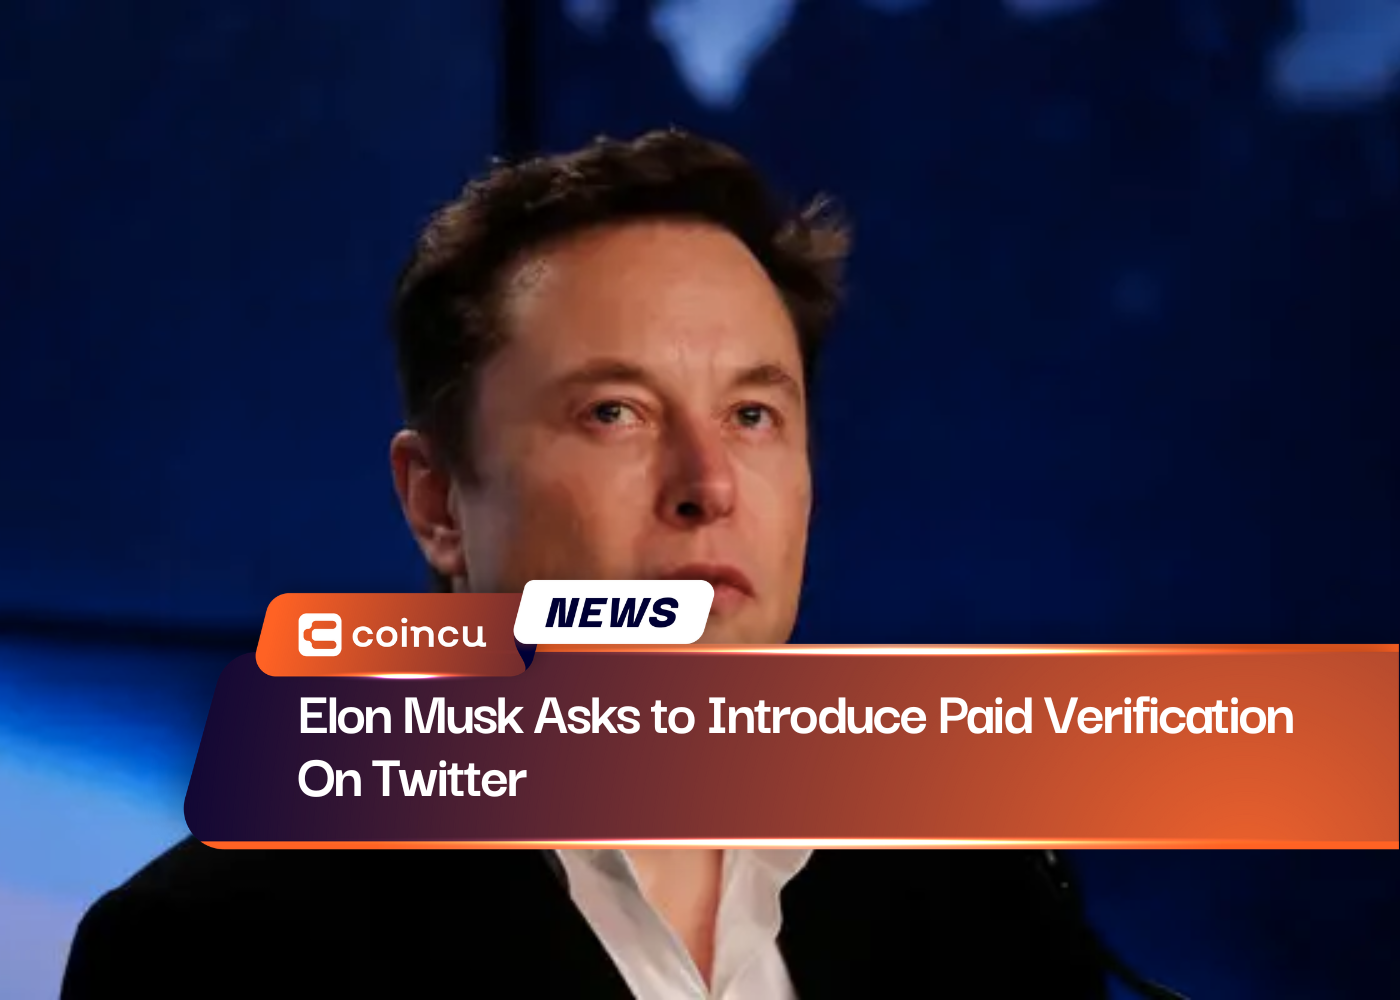 Elon Musk Asks to Introduce Paid Verification On Twitter